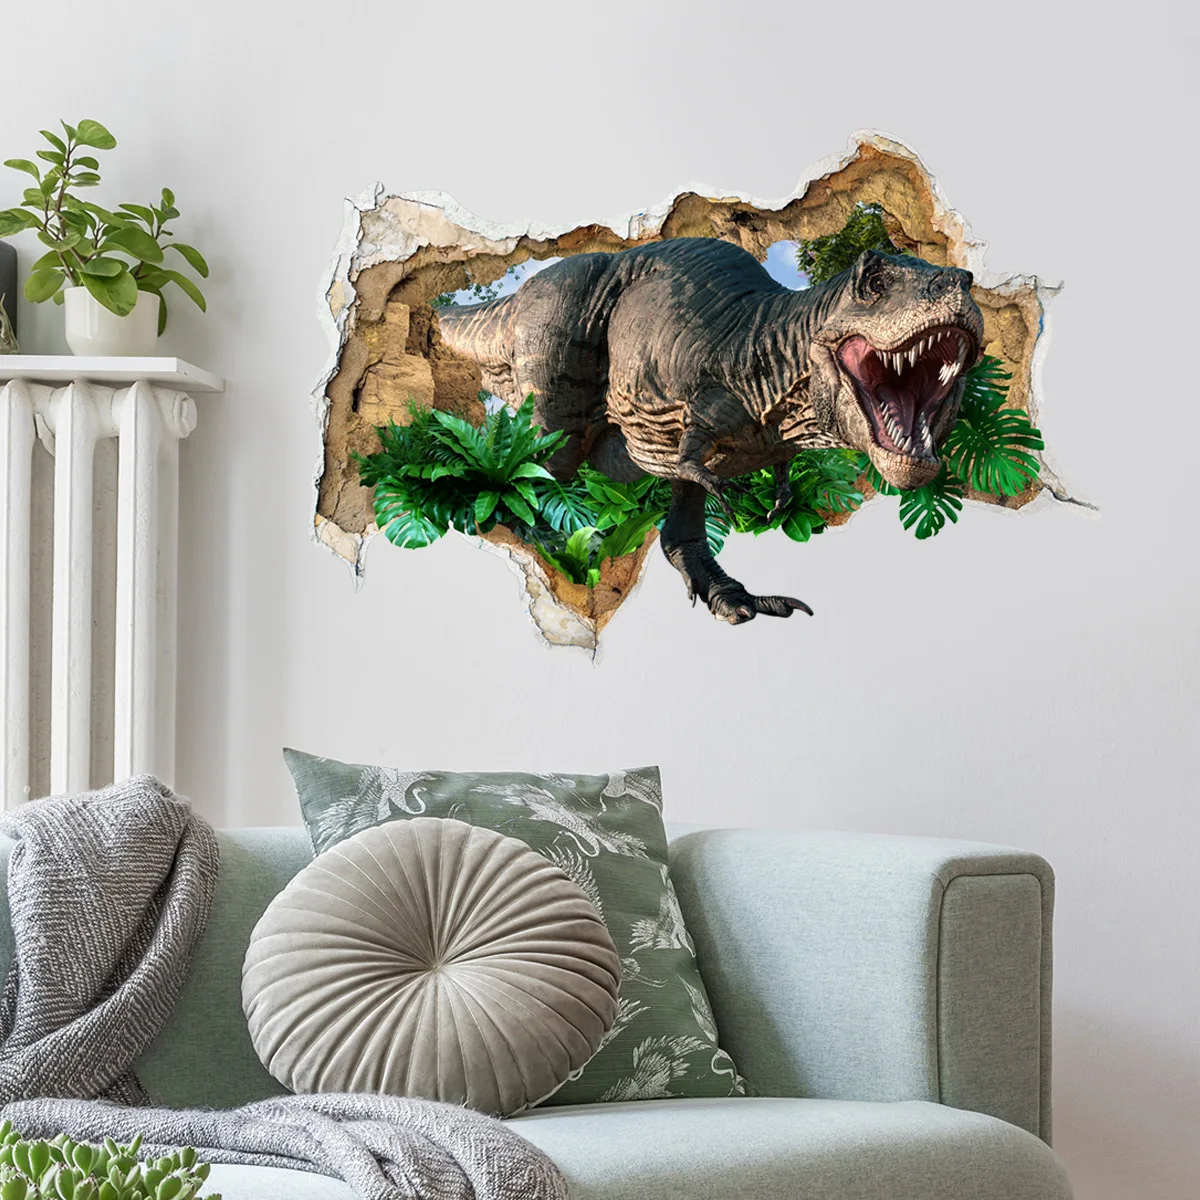 40*60cm Broken Wall Dinosaur Decorative Painting Wall Stickers Background Wall Home Decoration Wall Stickers Wallpaper Atw6009 brick wall fast food restaurant industrial decor custom mural wallpaper fried chicken burger pizza snack bar decor wall paper